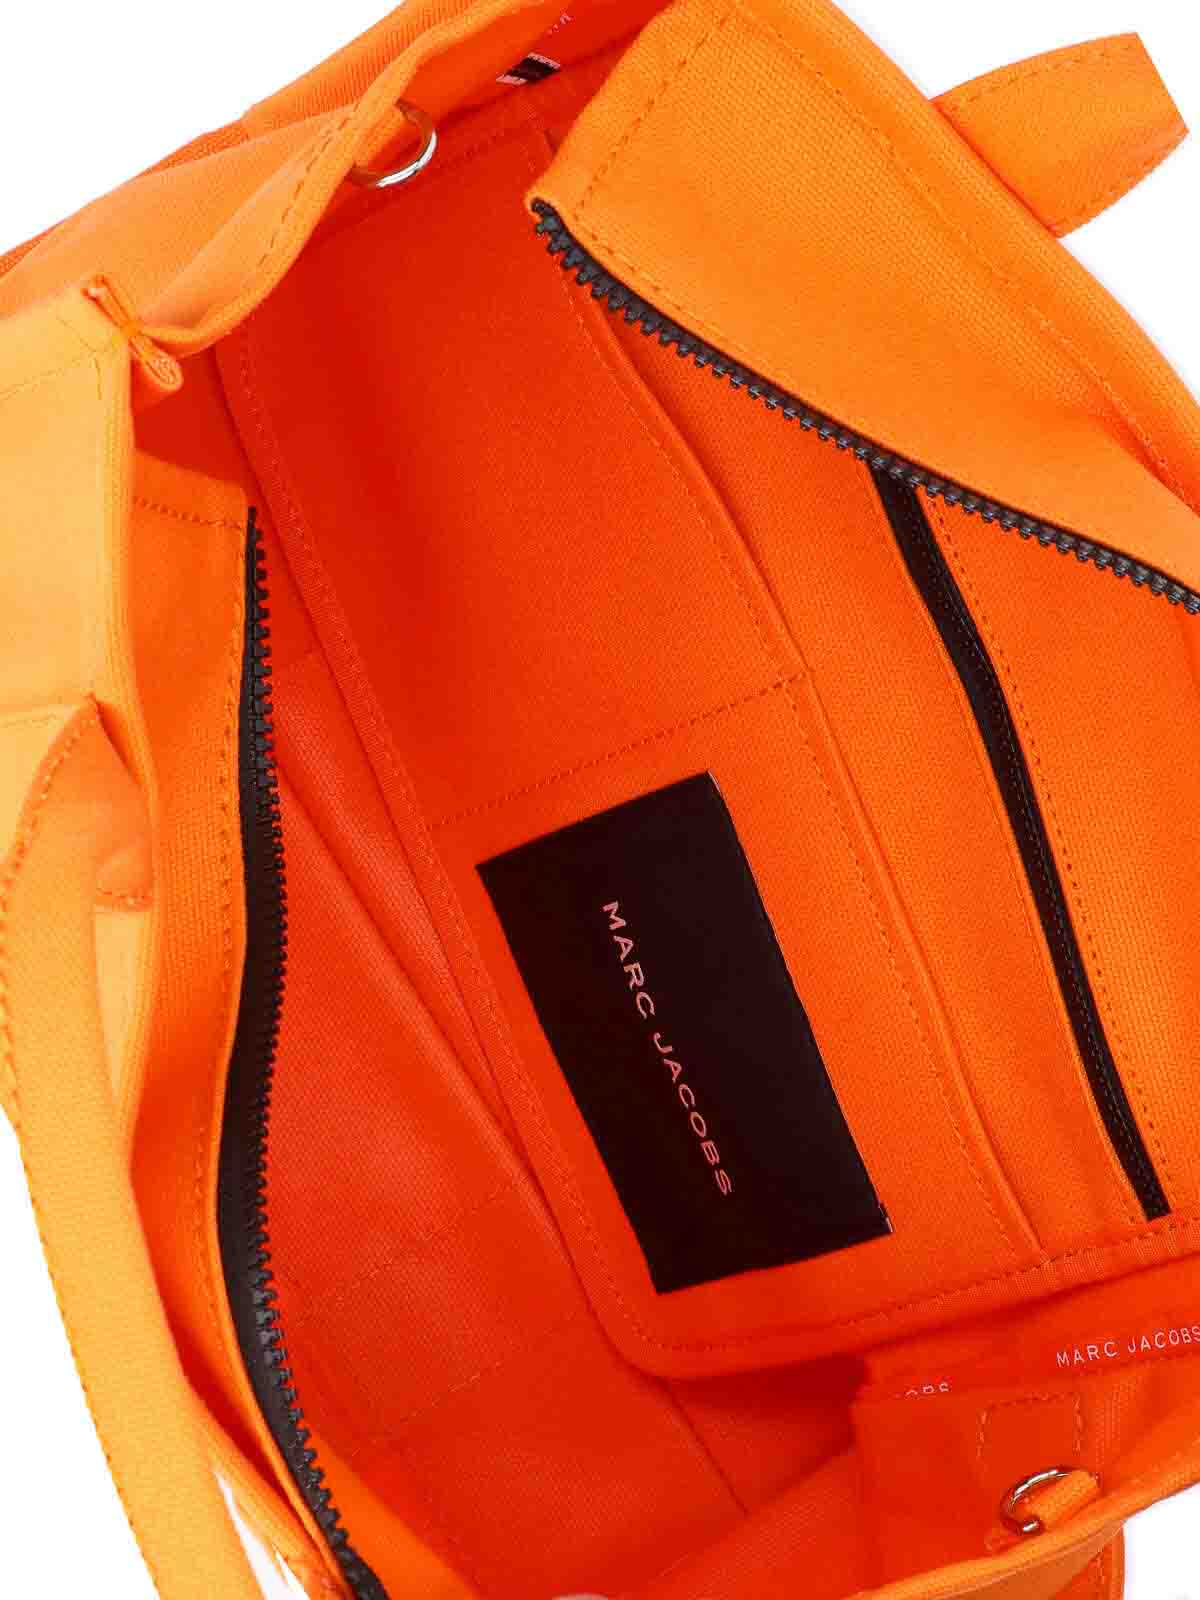 Shop Marc Jacobs Bolso Shopping - The Tote Bag In Orange